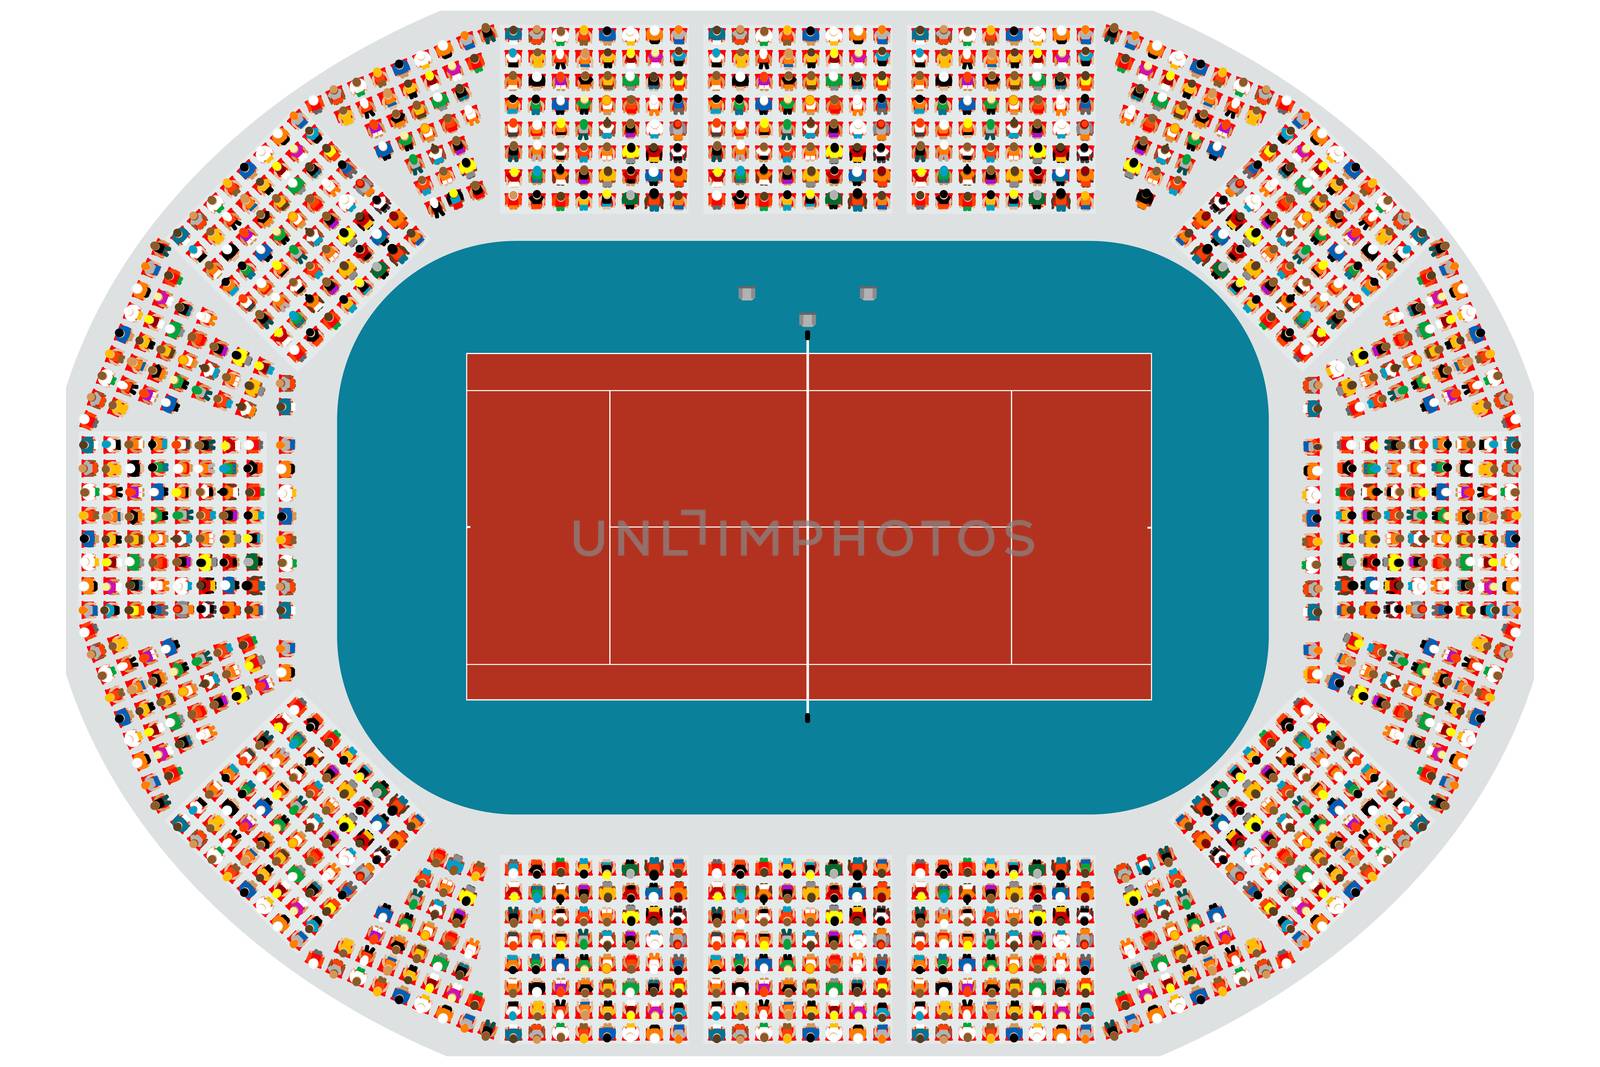 Top view of a tennis arena